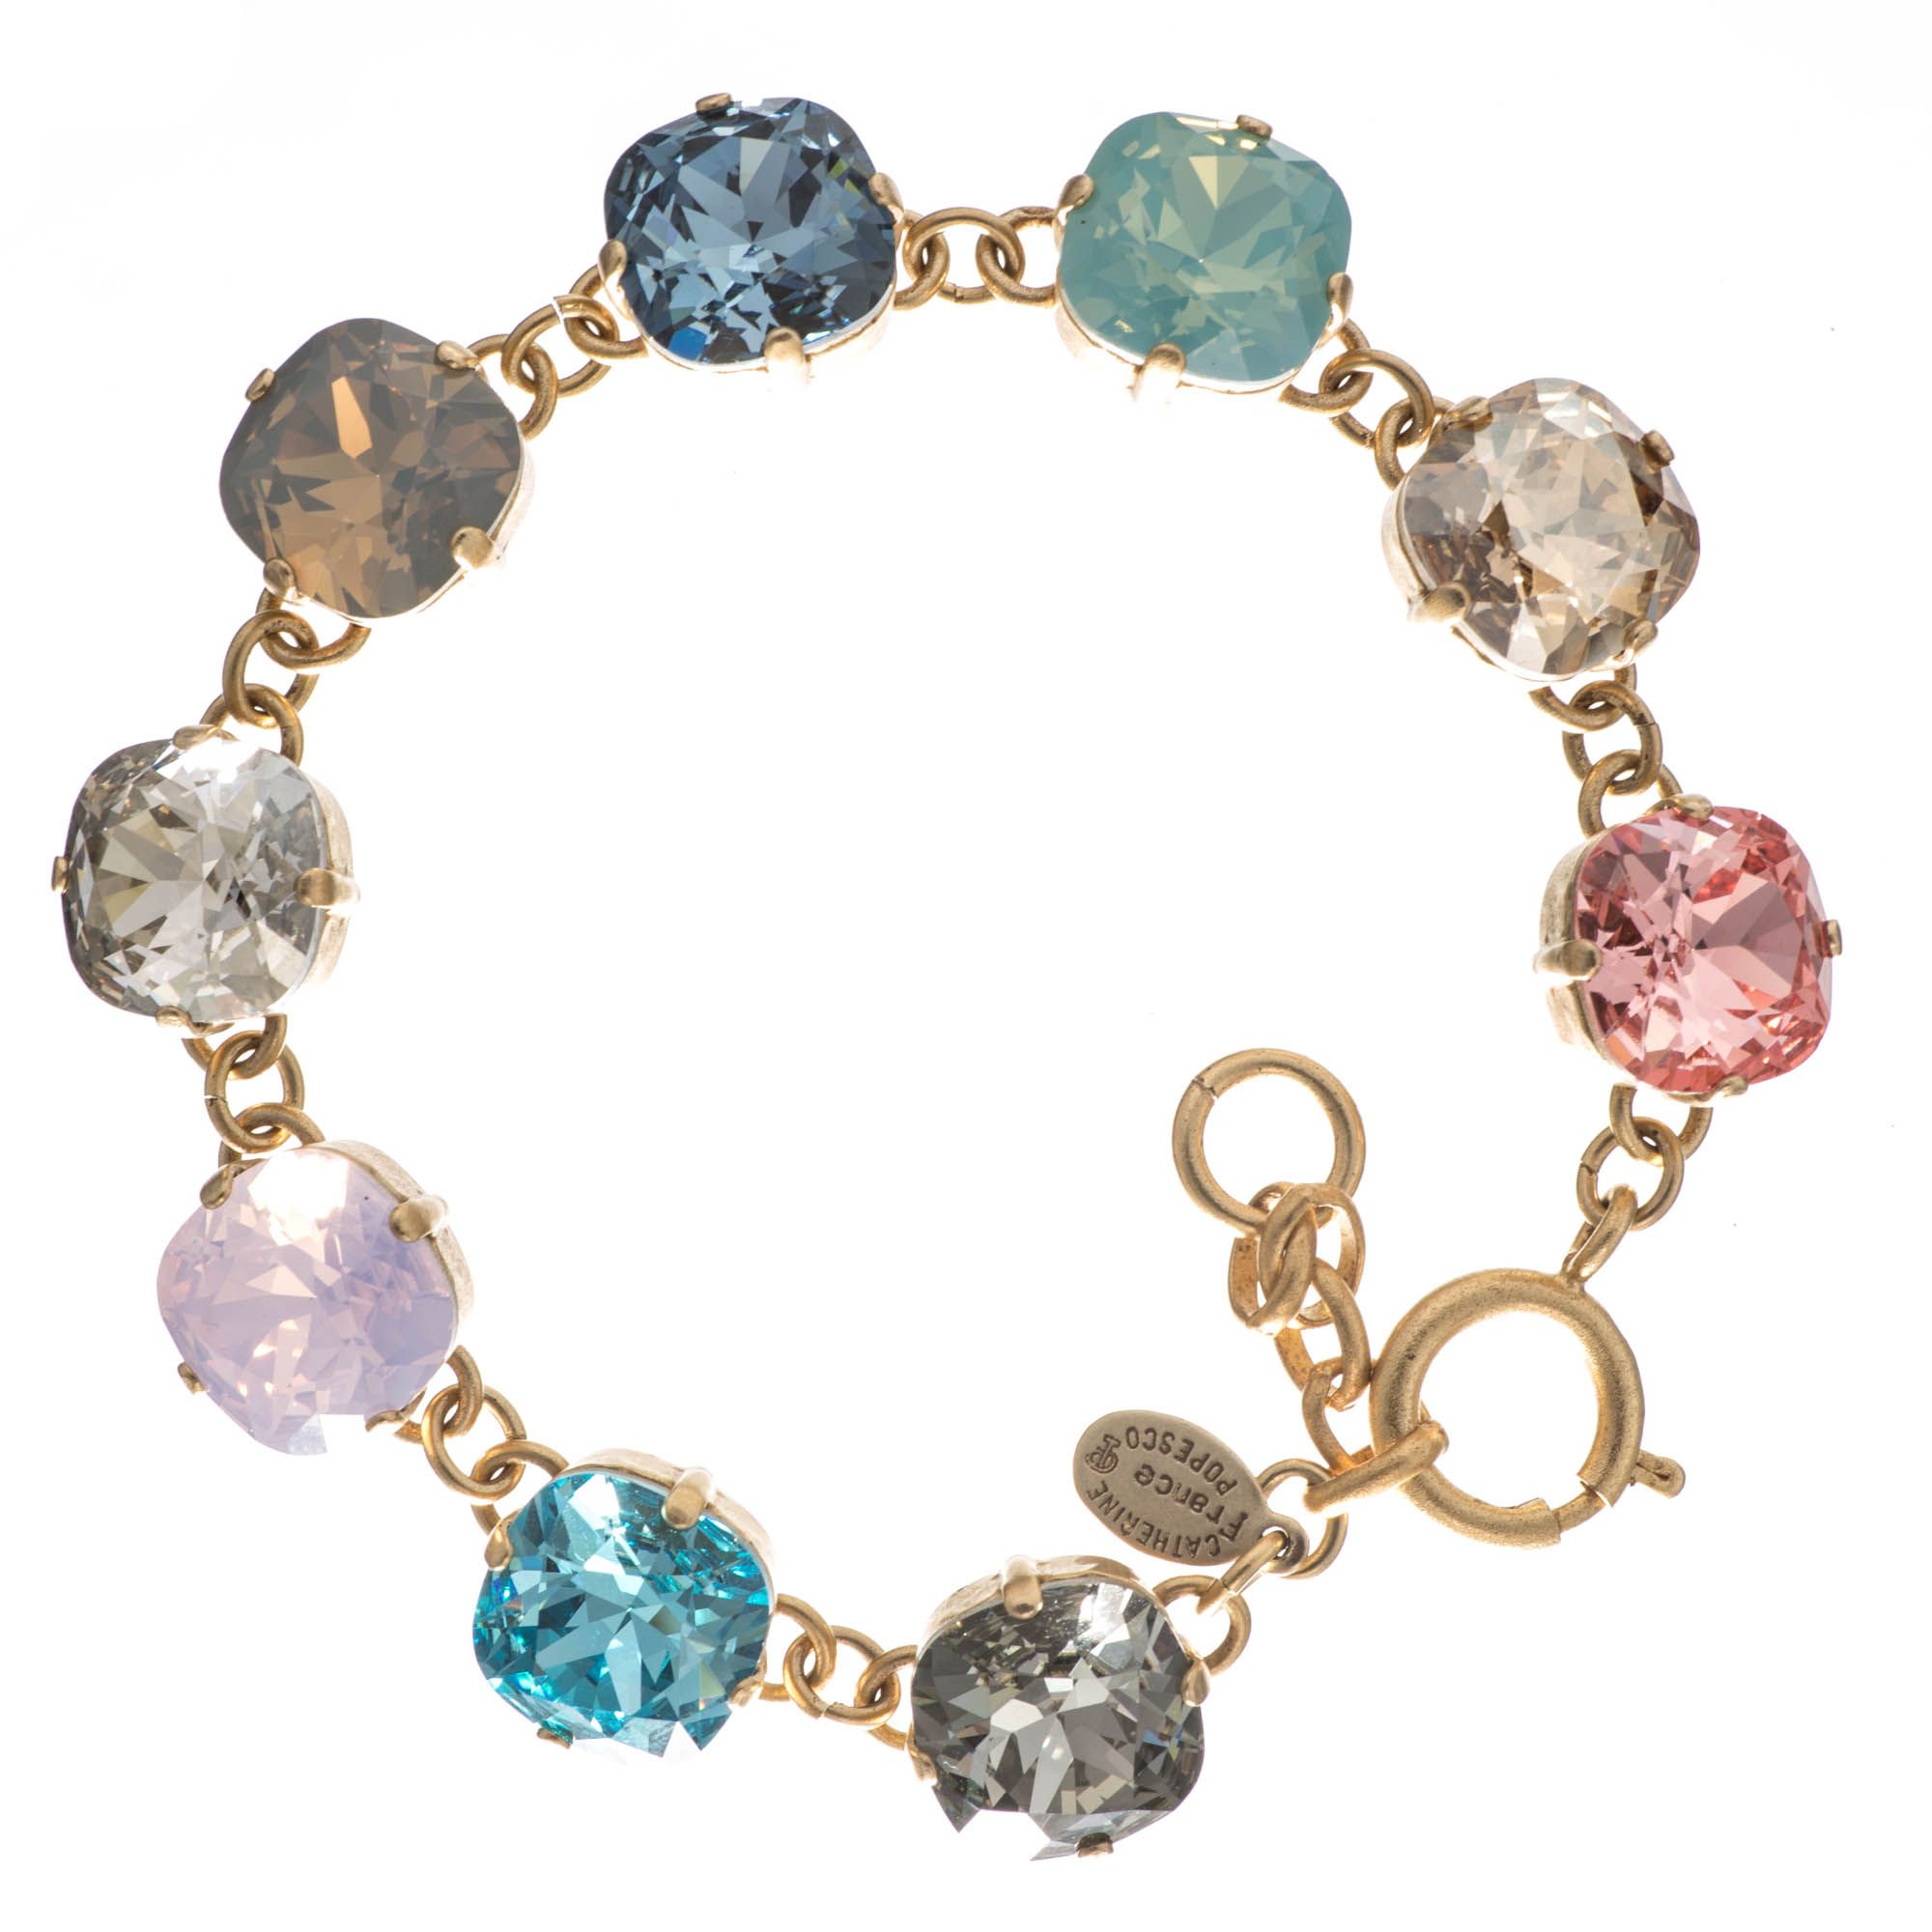 Large Stone Crystal Bracelet - All Colors in Silver and Gold